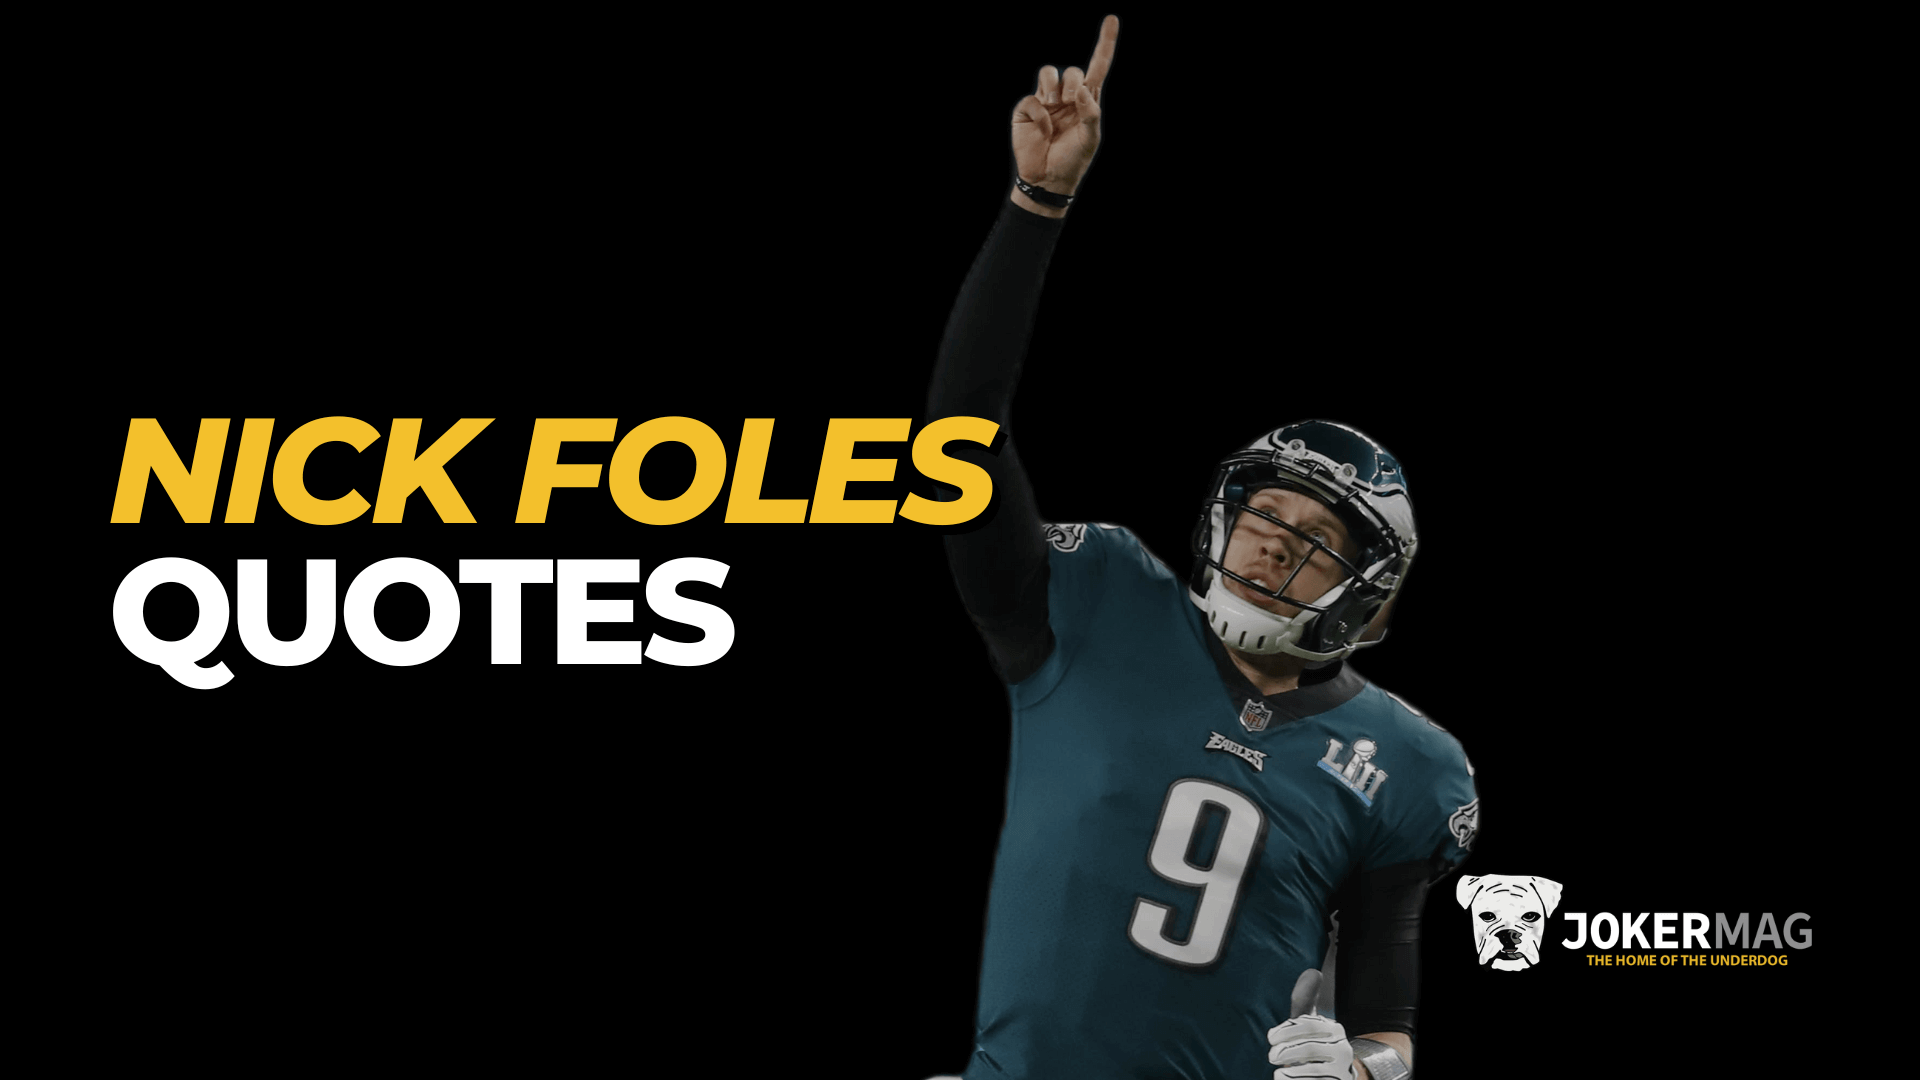 Inspiring Nick Foles quotes by Joker Mag – the home of the underdog